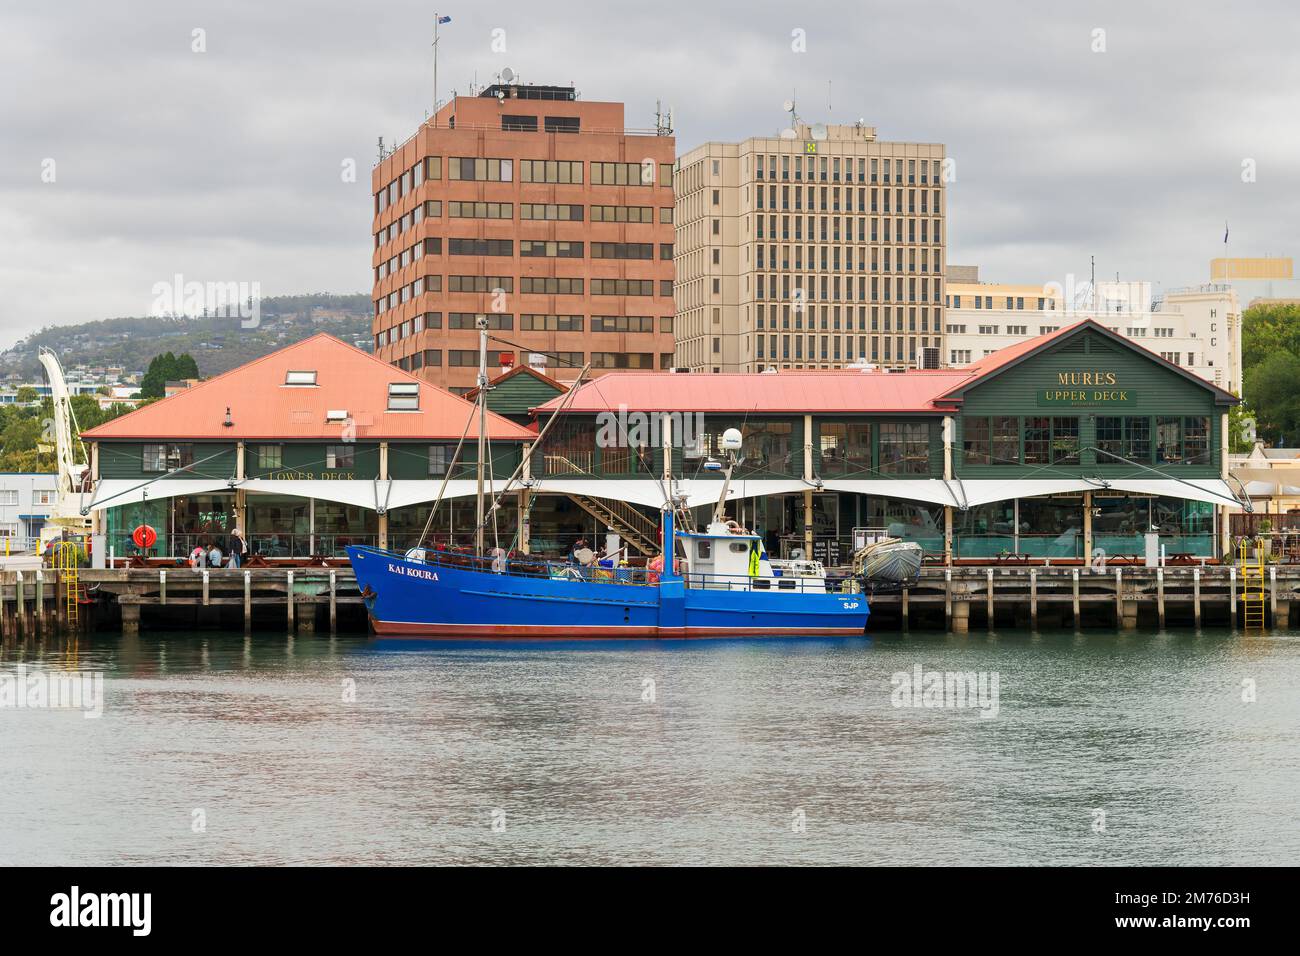 HOBART, TASMANIA, AUSTRALIA. March 06, 2022.  fishing vessel moored in the Victoria dock along side the Mures seafood restaurant. Stock Photo